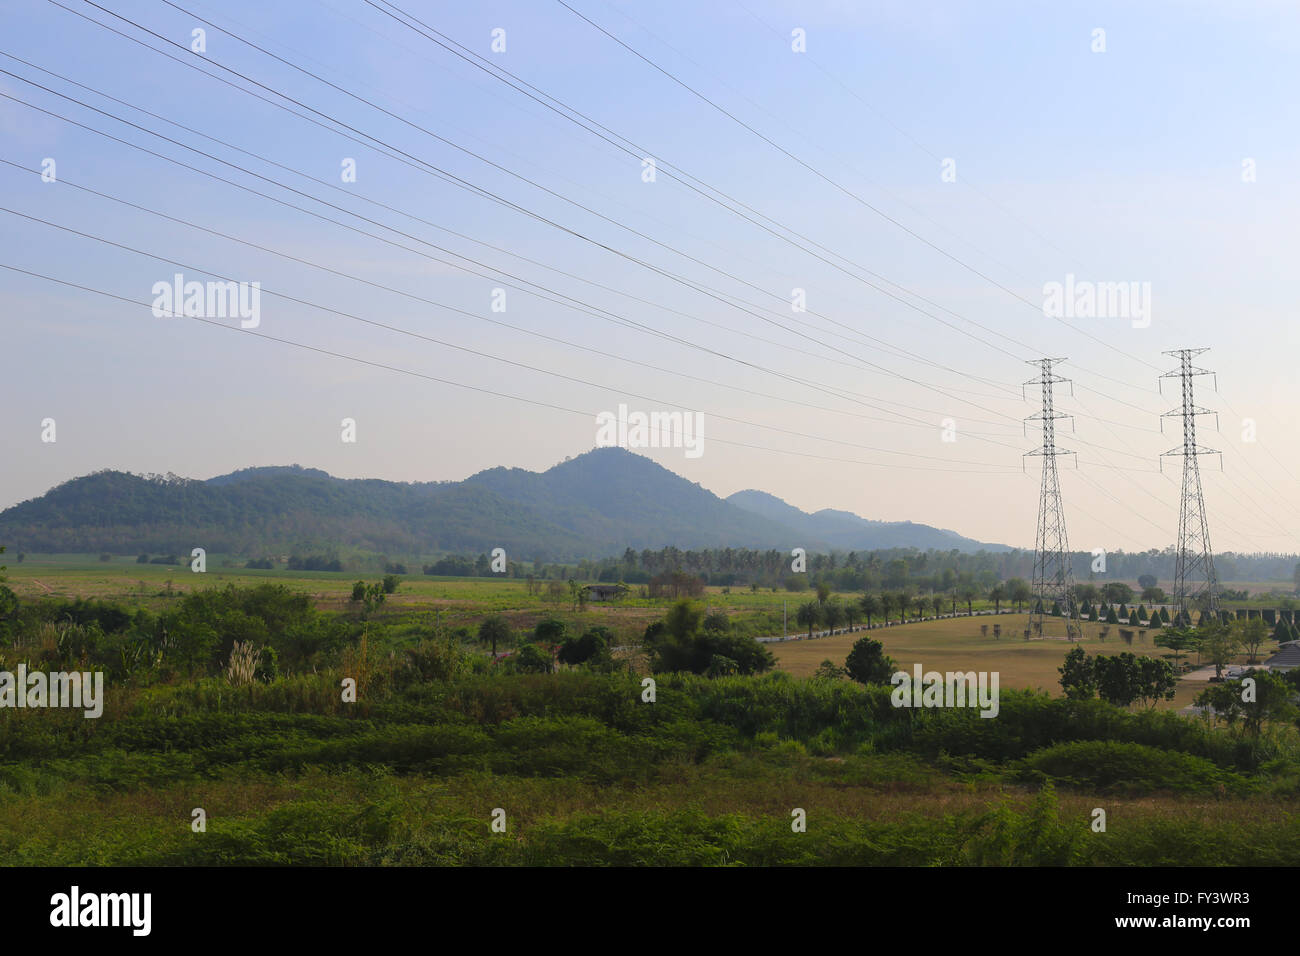 Natural scenery and high voltage poles in rural areas of the Thailand. Stock Photo